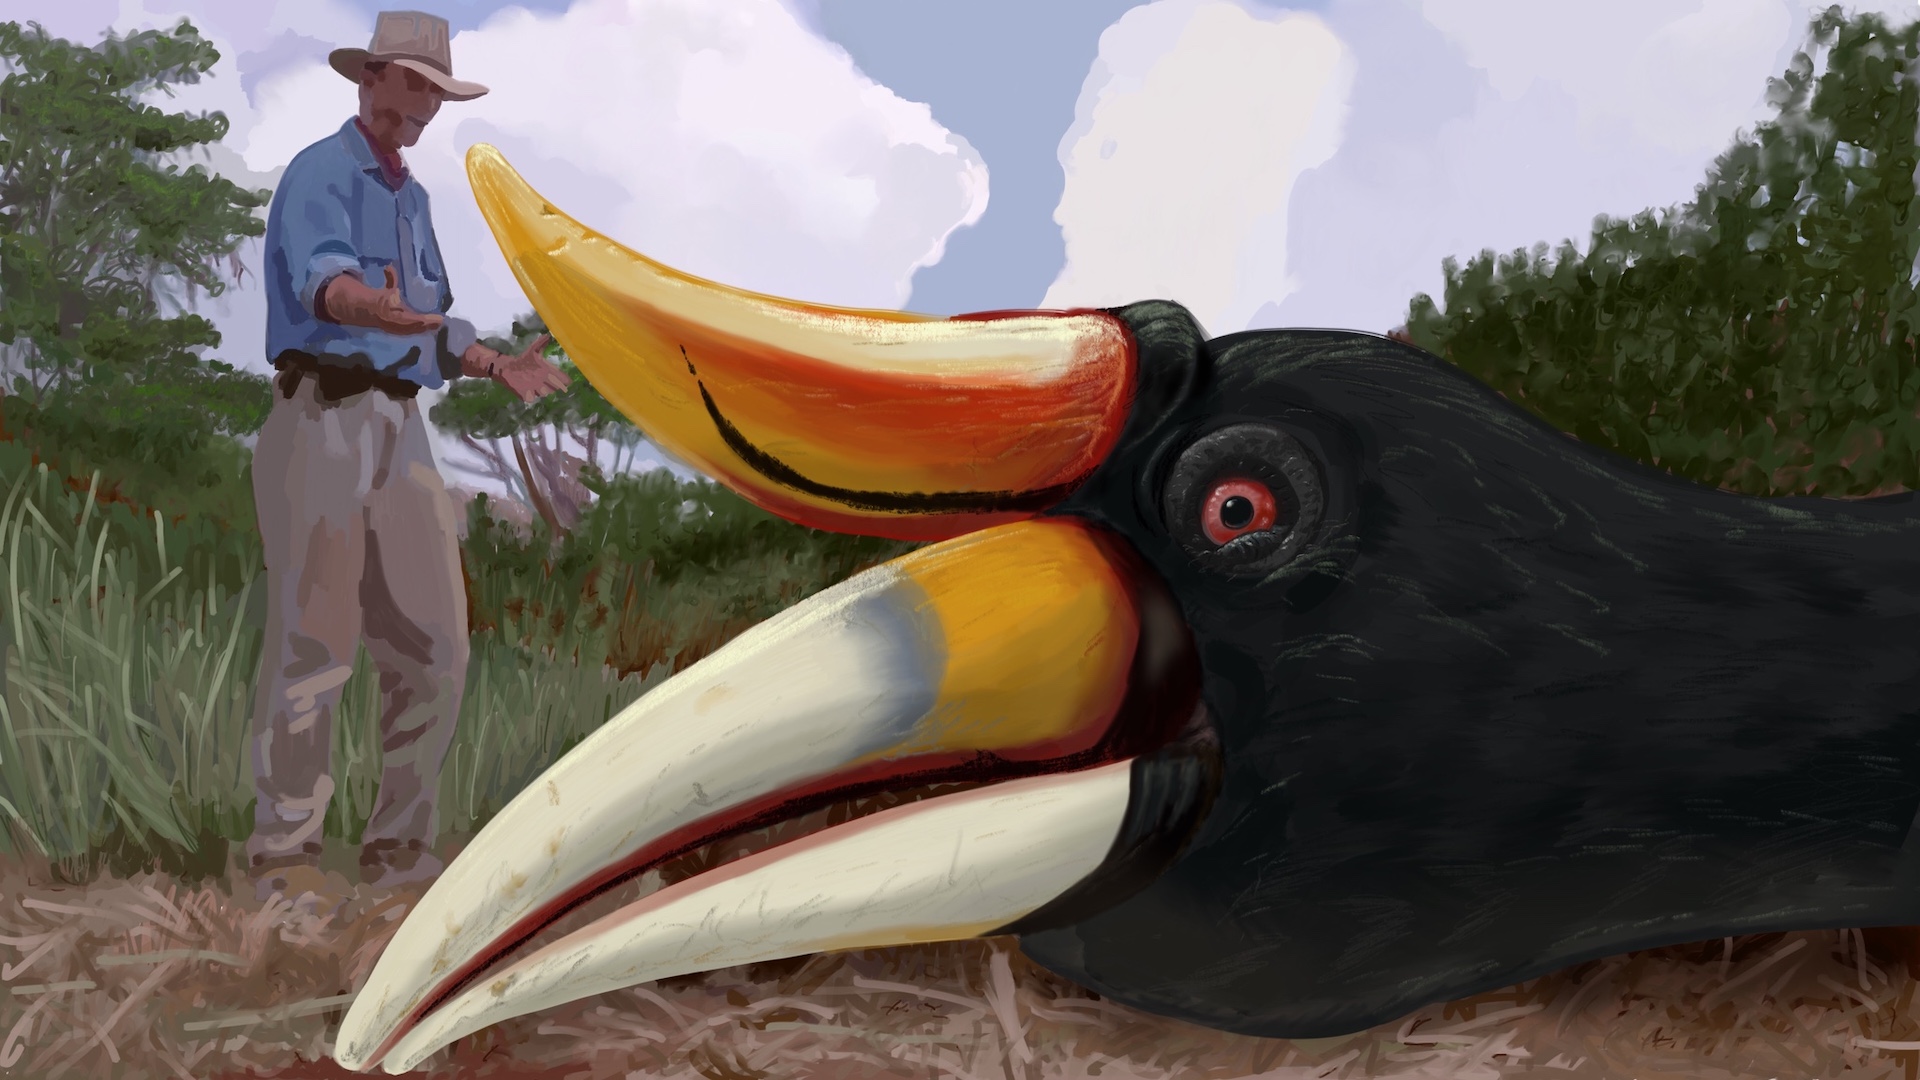 Digitally painted reproduction of of a frame from Jurassic Park, but with a rhinoceros hornbill instead of a triceratops.